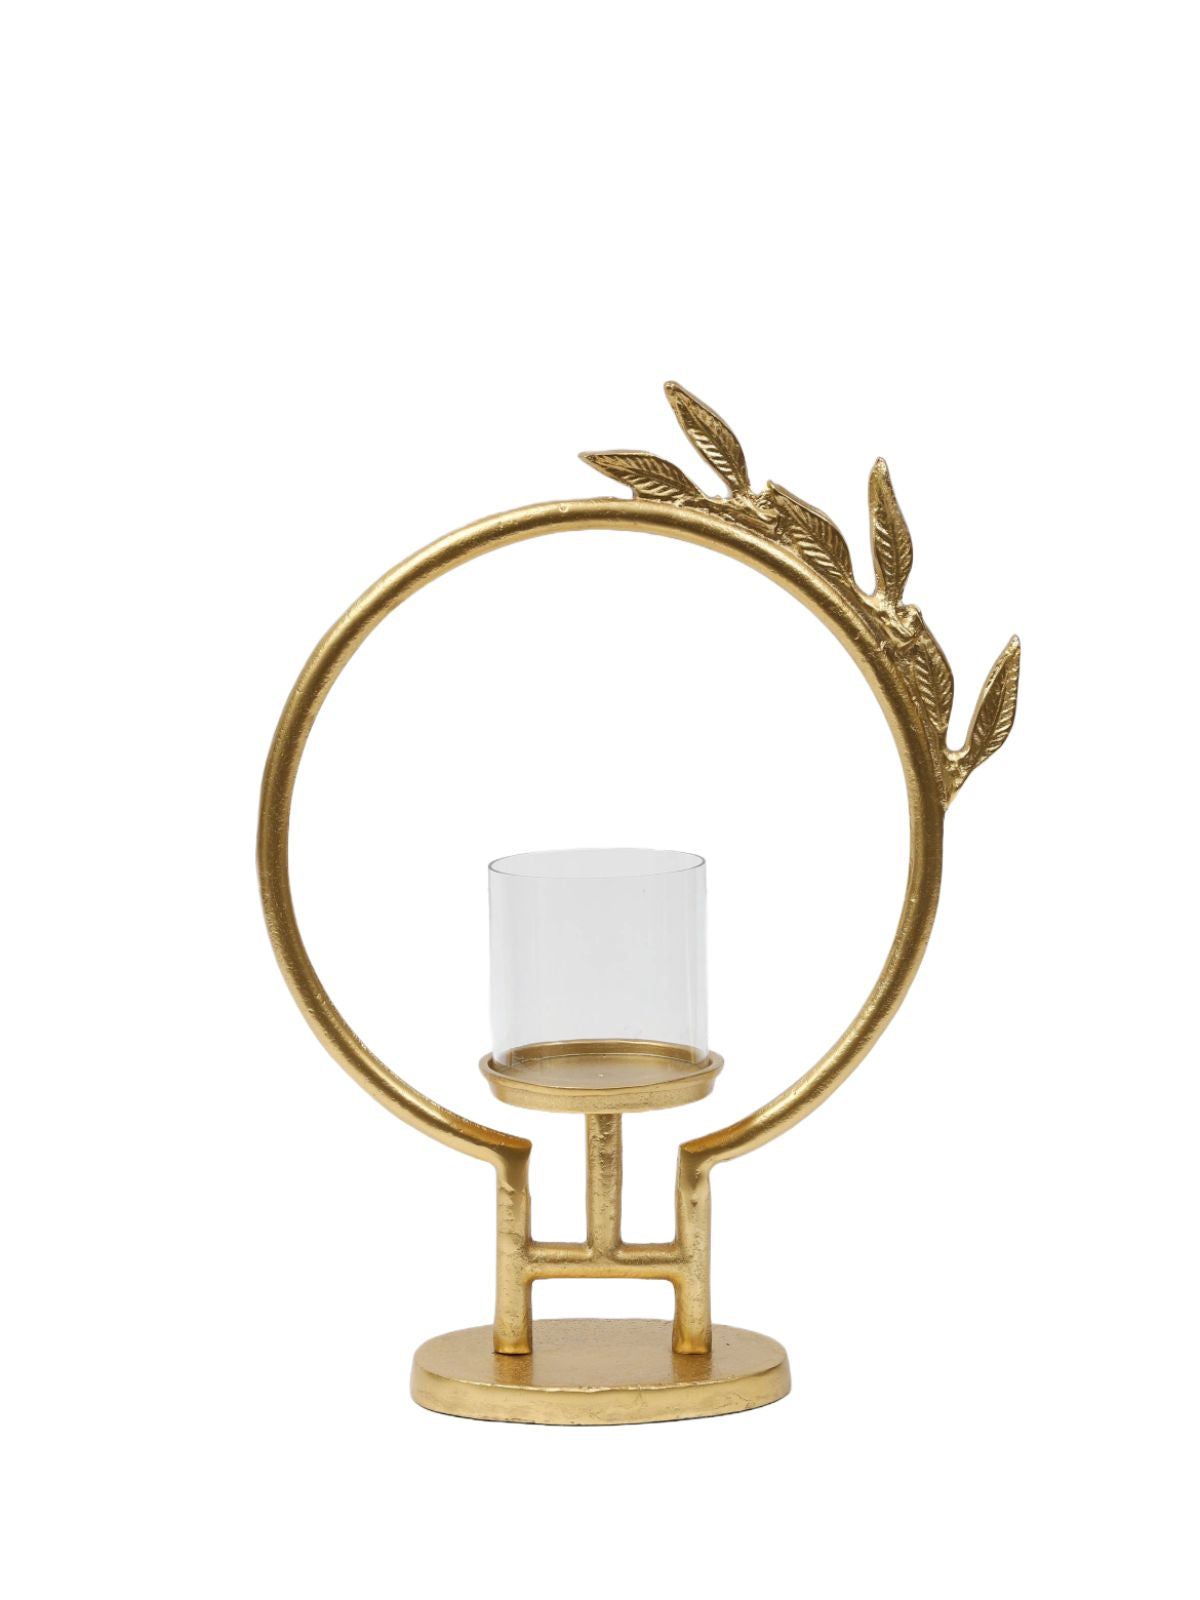 19 inch Gold Brass and Glass Circled Hurricane Candle Holder with Gold Leaf Design on Top.